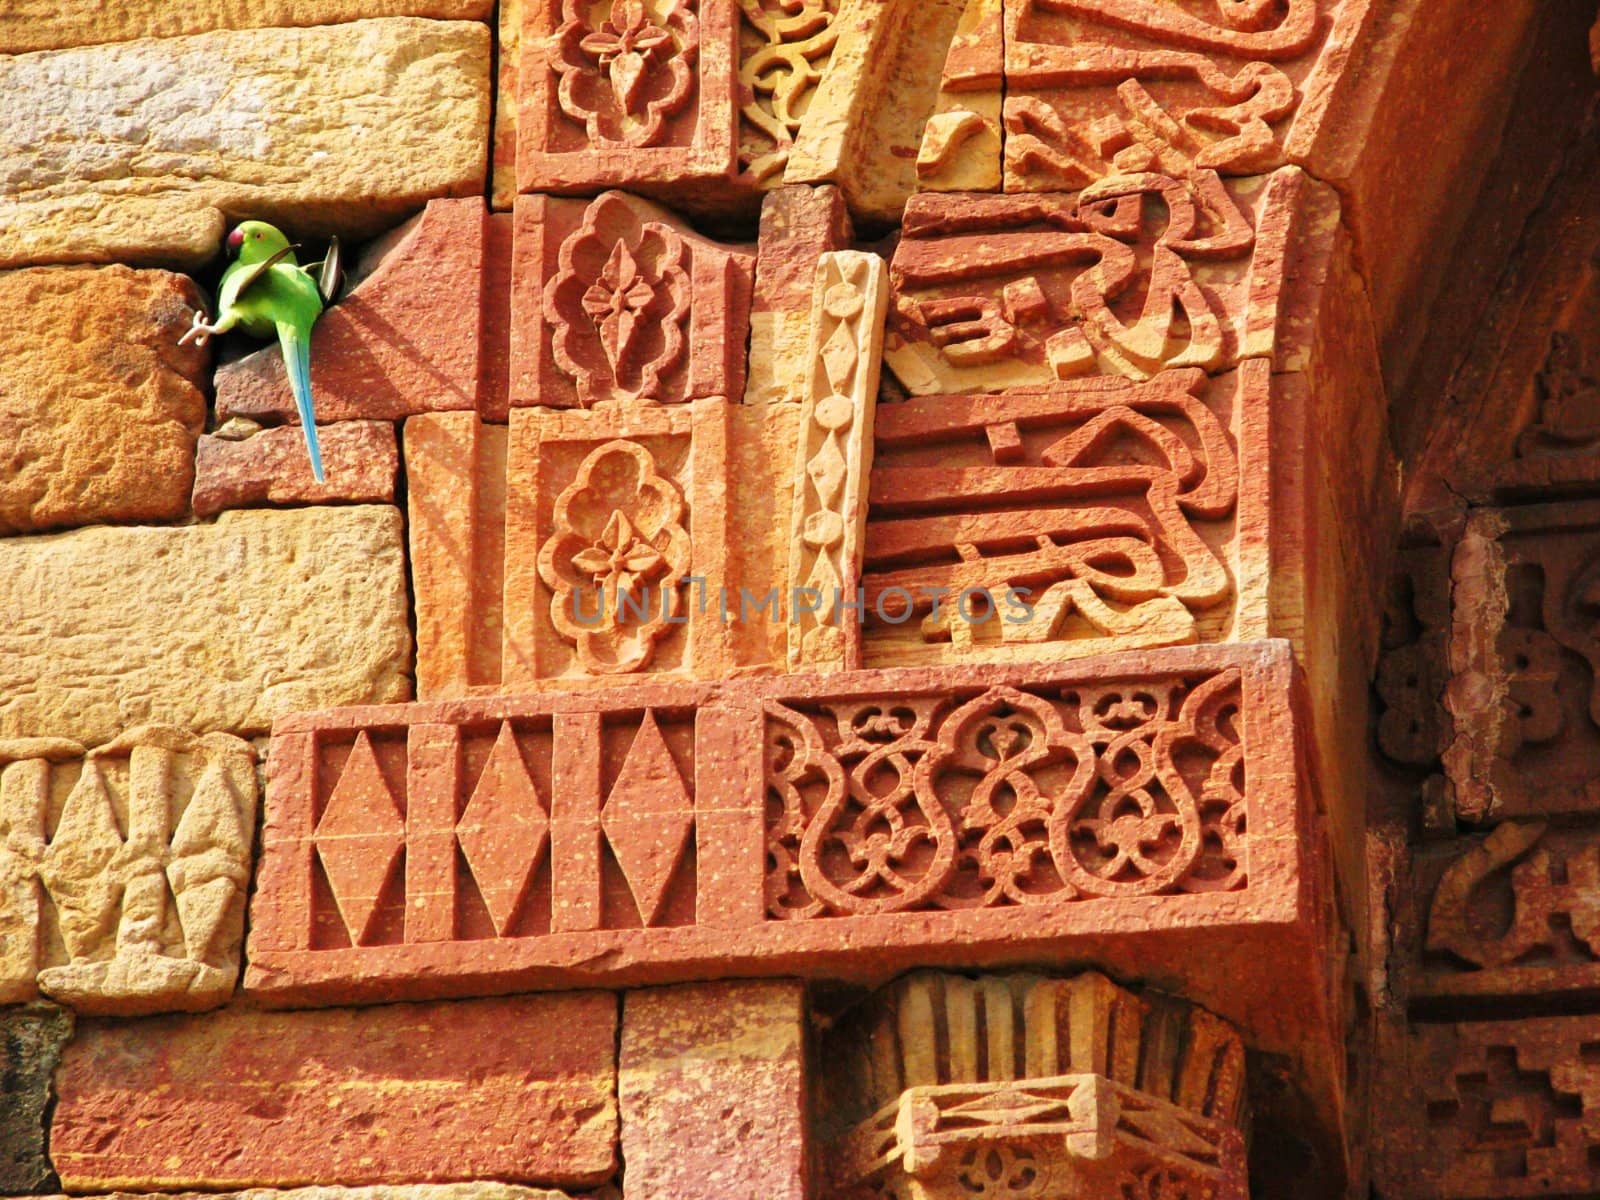 A parrot sitting in the carvings at Qutab Minar in New Delhi, India.